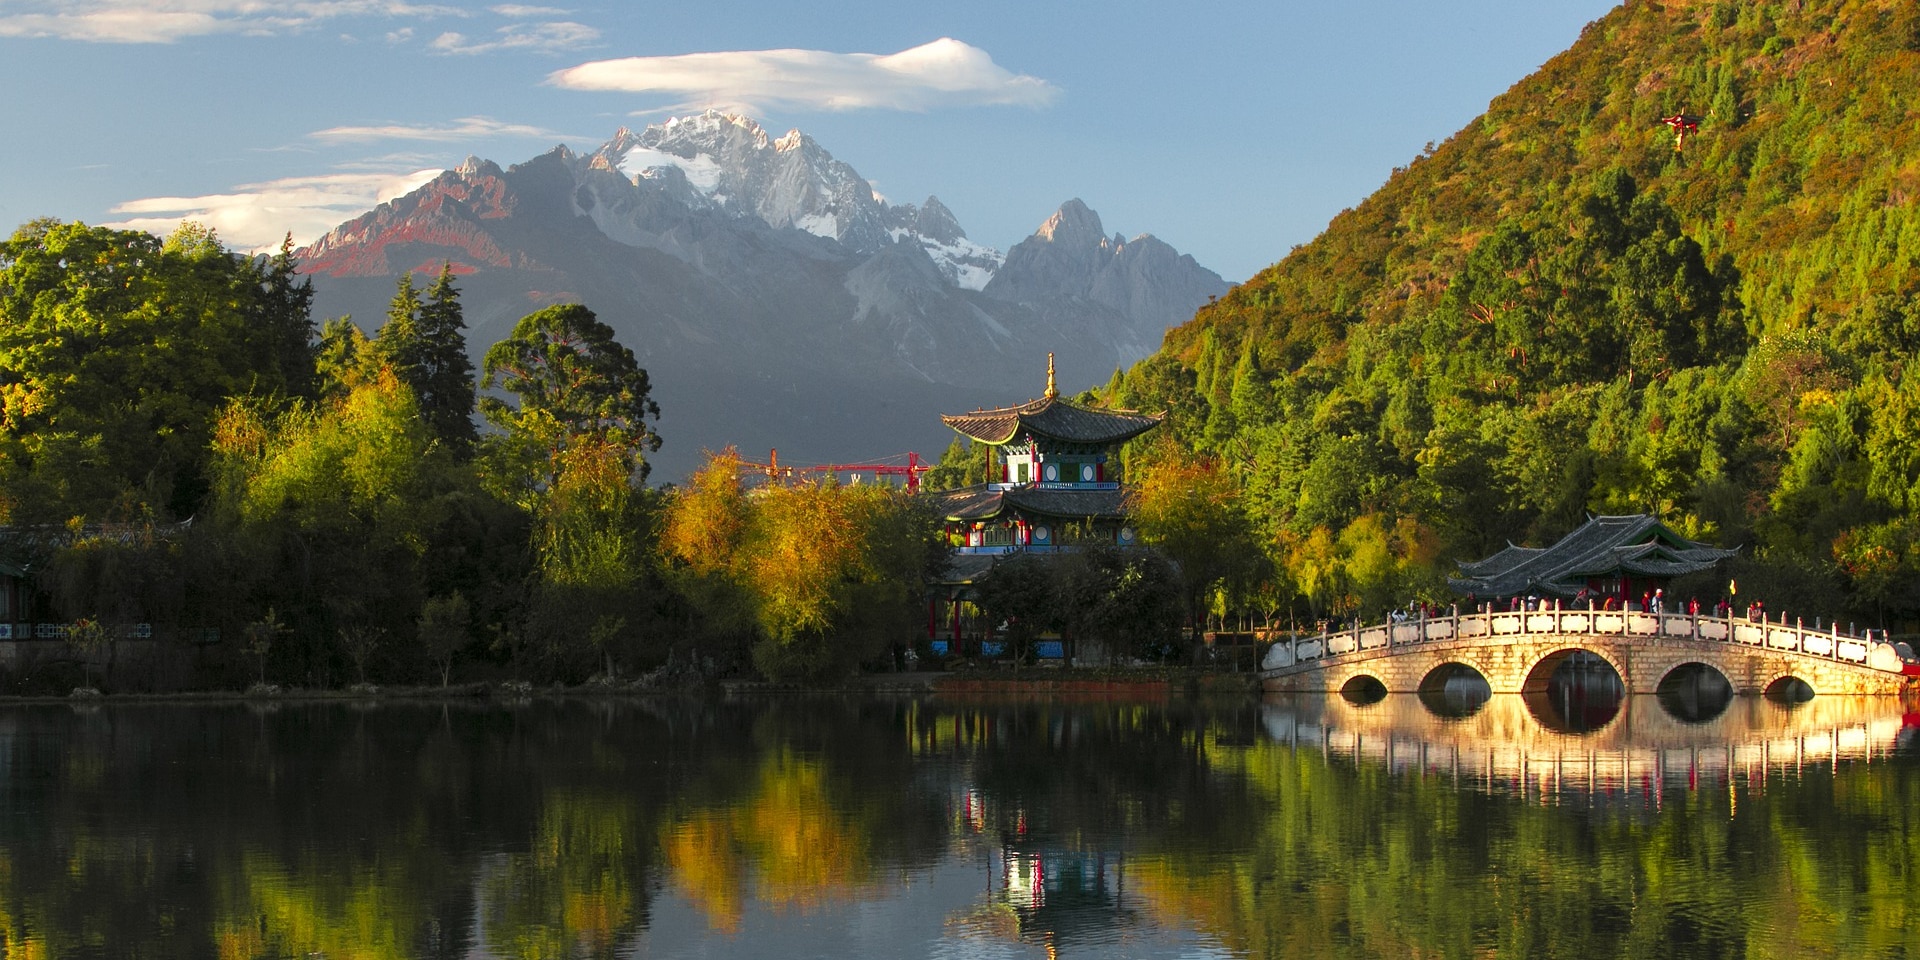 View of Jade Dragon Snow Mountain from Lijiang.